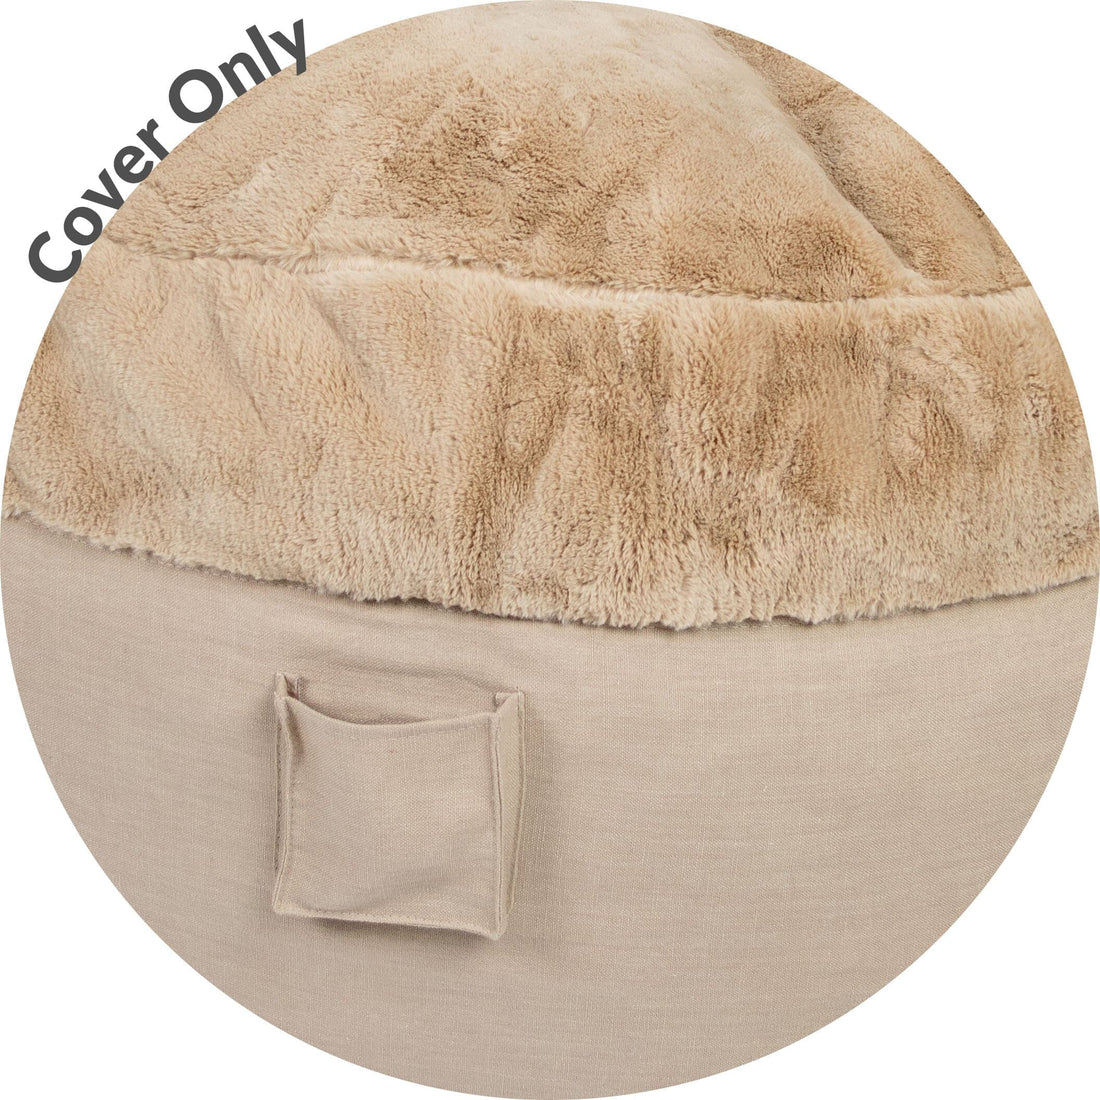 Queen Cover Only - NEST Bunny Fur (Excludes Pillow)